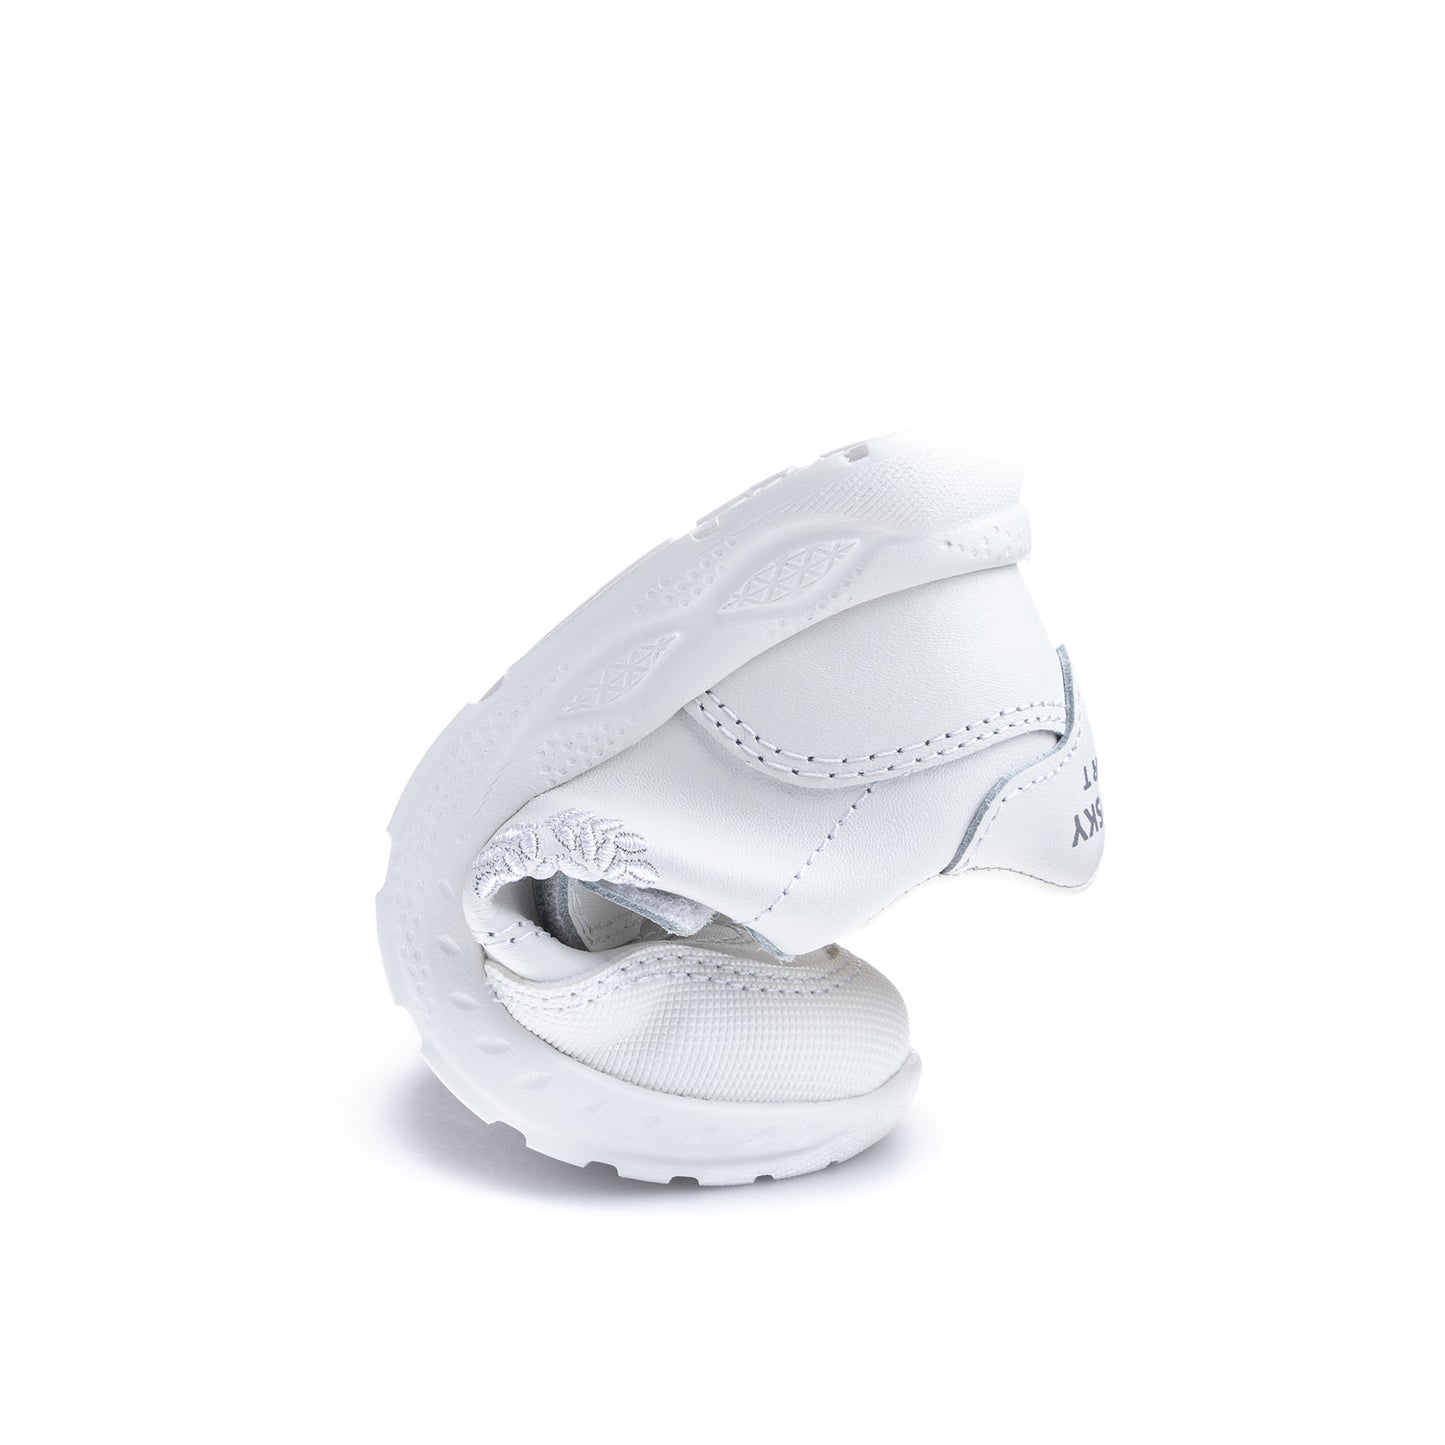 Pablosky White School Shoes / 296900